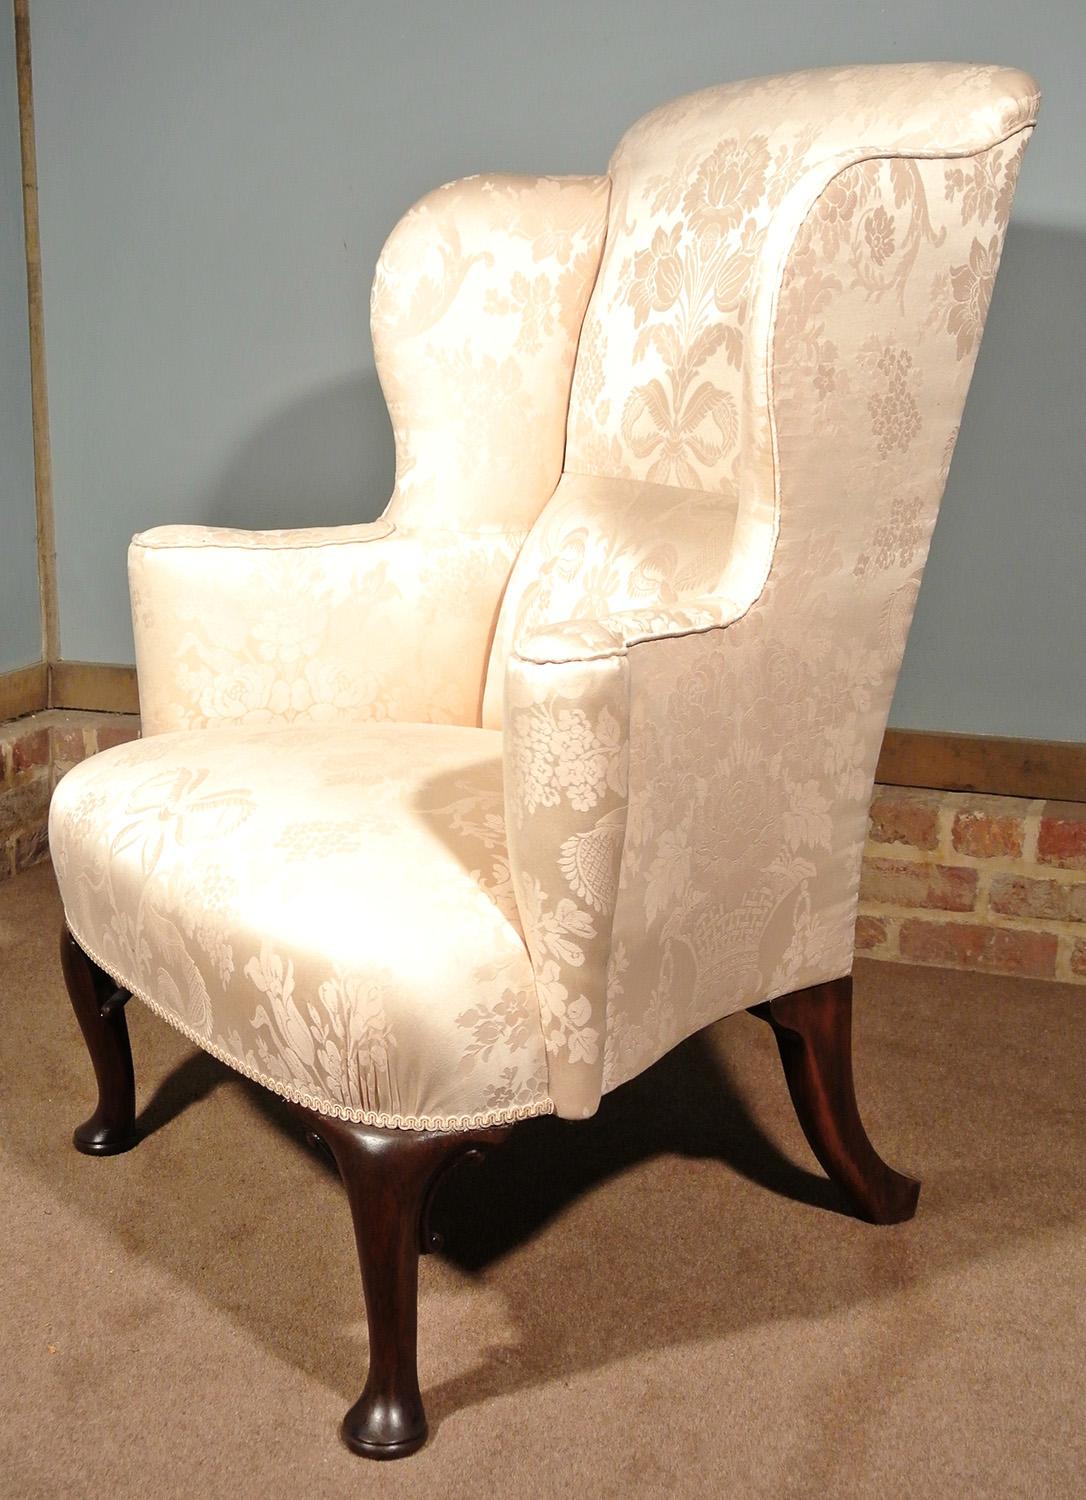 George III Walnut Wing Back Chair in Pale Cream, circa 1780 For Sale 1